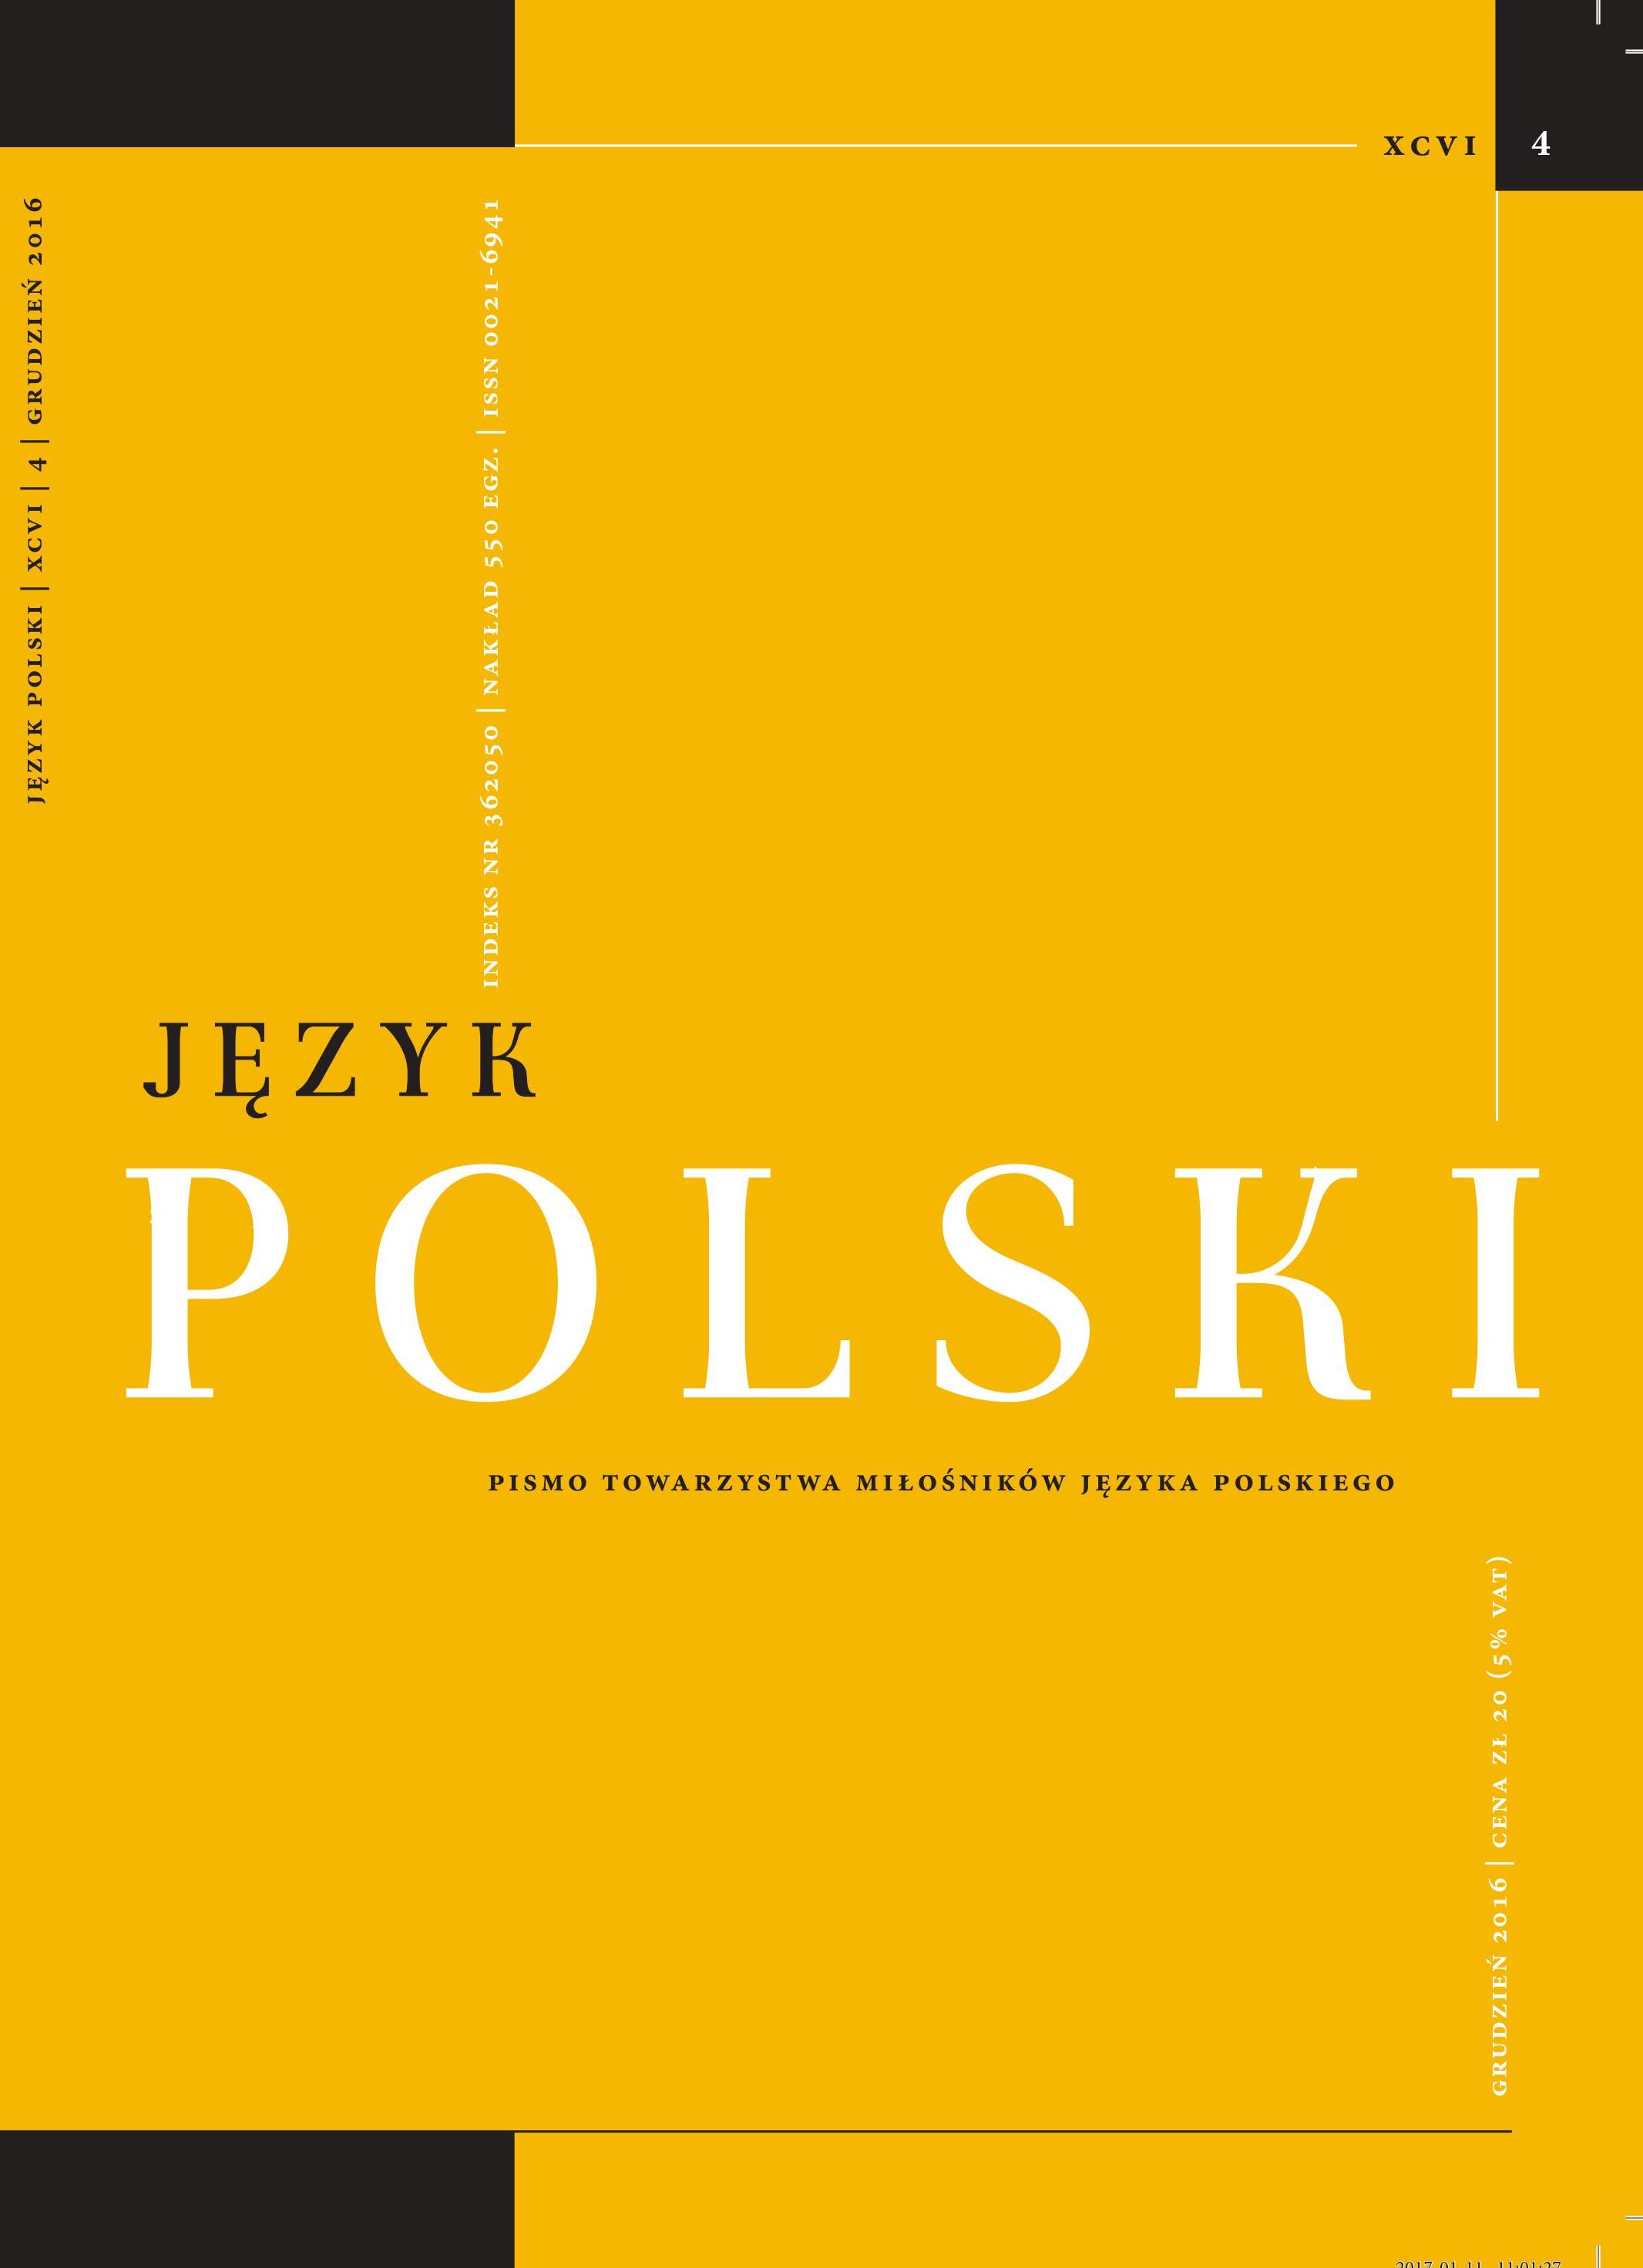 The persistent "pod tytułem" Cover Image